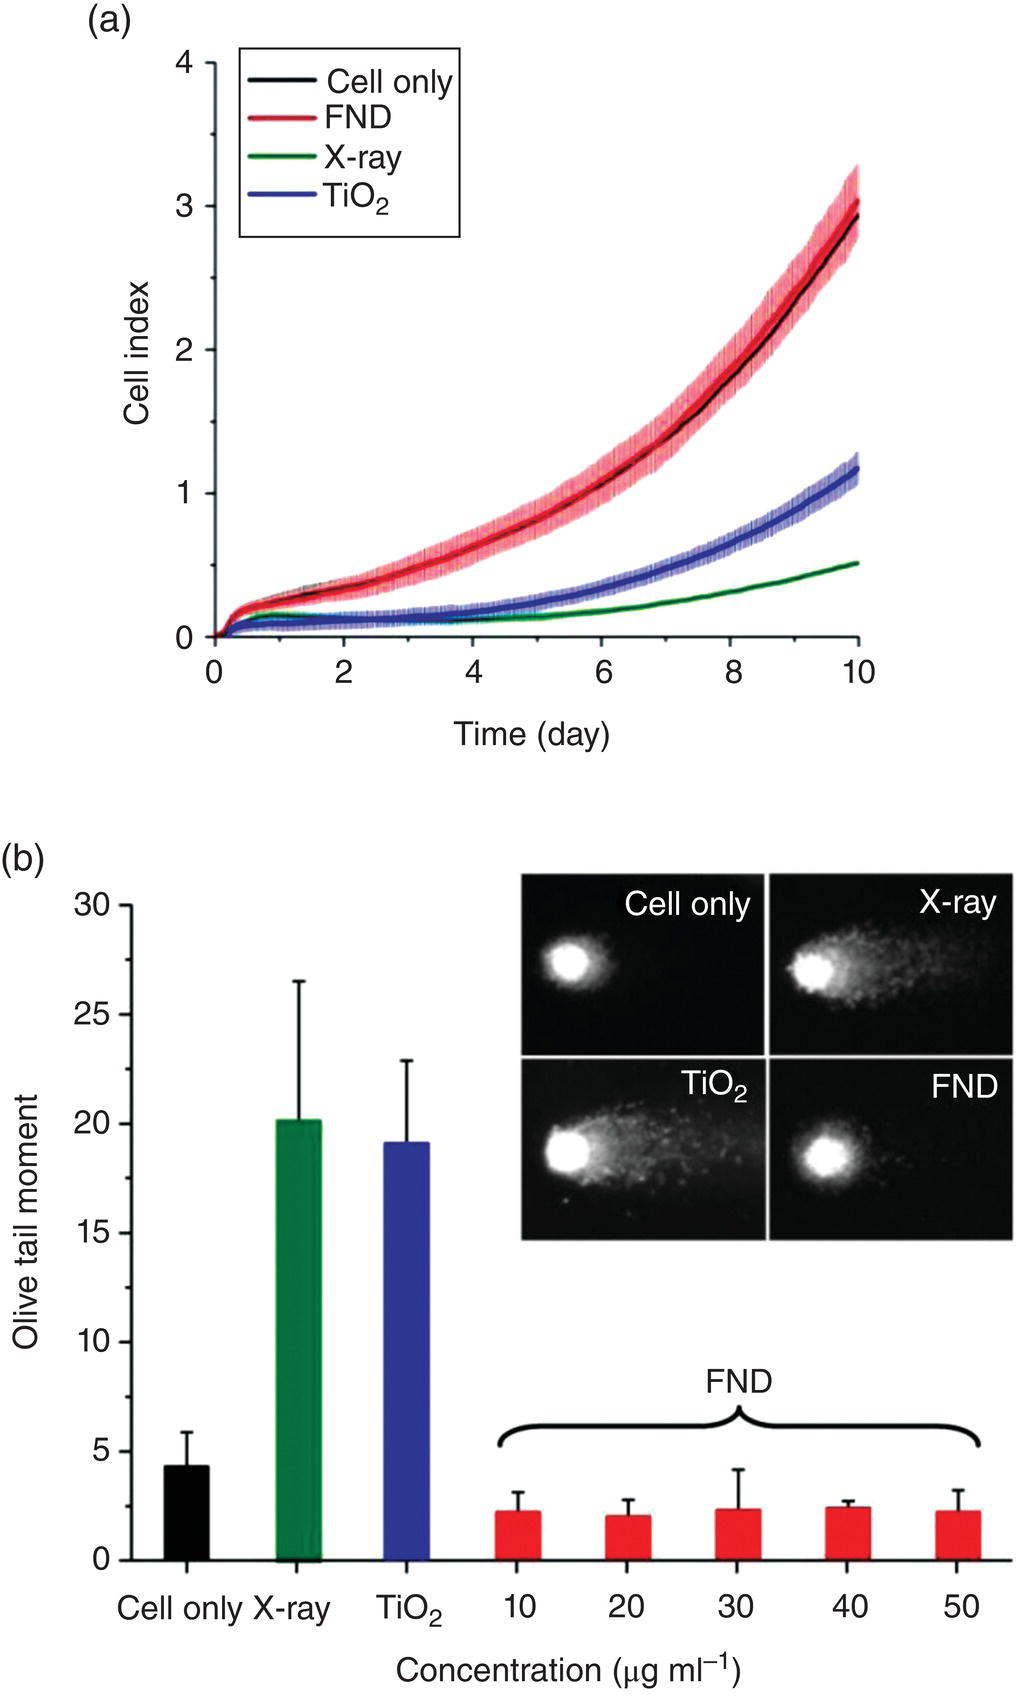 Graph of cell proliferation (top) and bar graph of comet assays (bottom) of human fibroblasts after treatments with X‐ray, TiO2, and FNDs. Images of cell only, X-ray, TiO2, and FND are displayed above the bar graph.